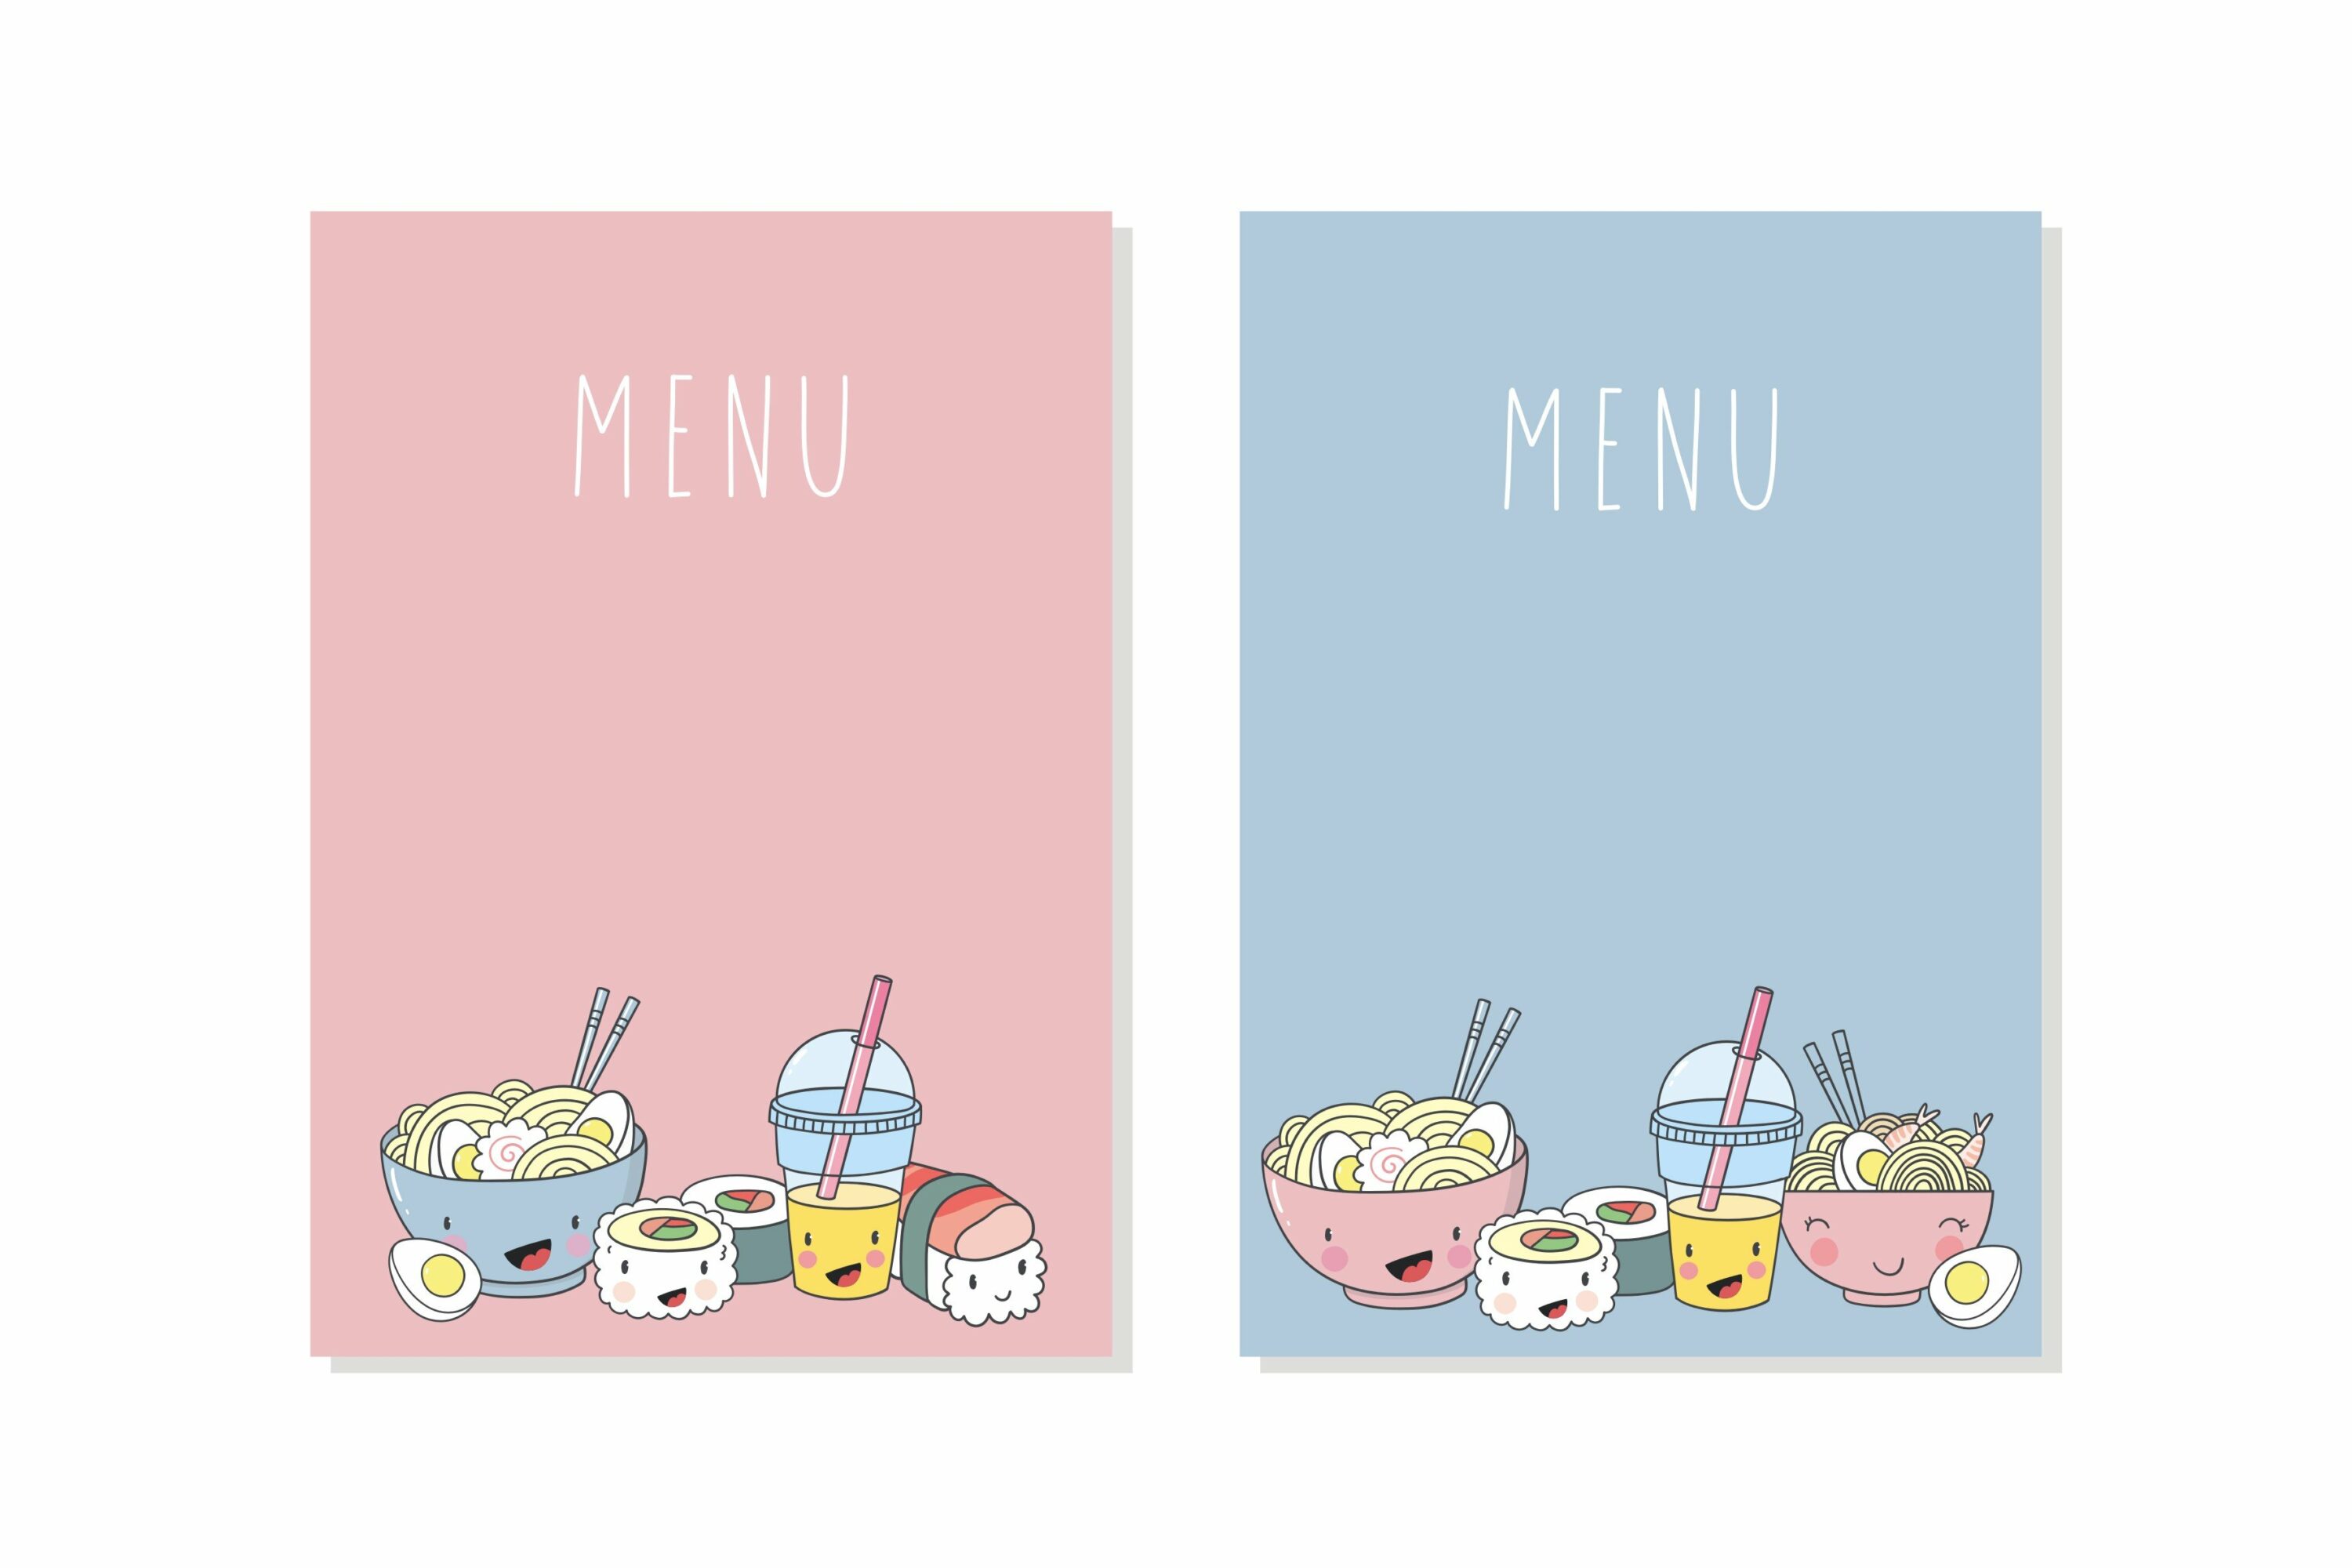 Two background versions - in pink and blue with an Asian food.